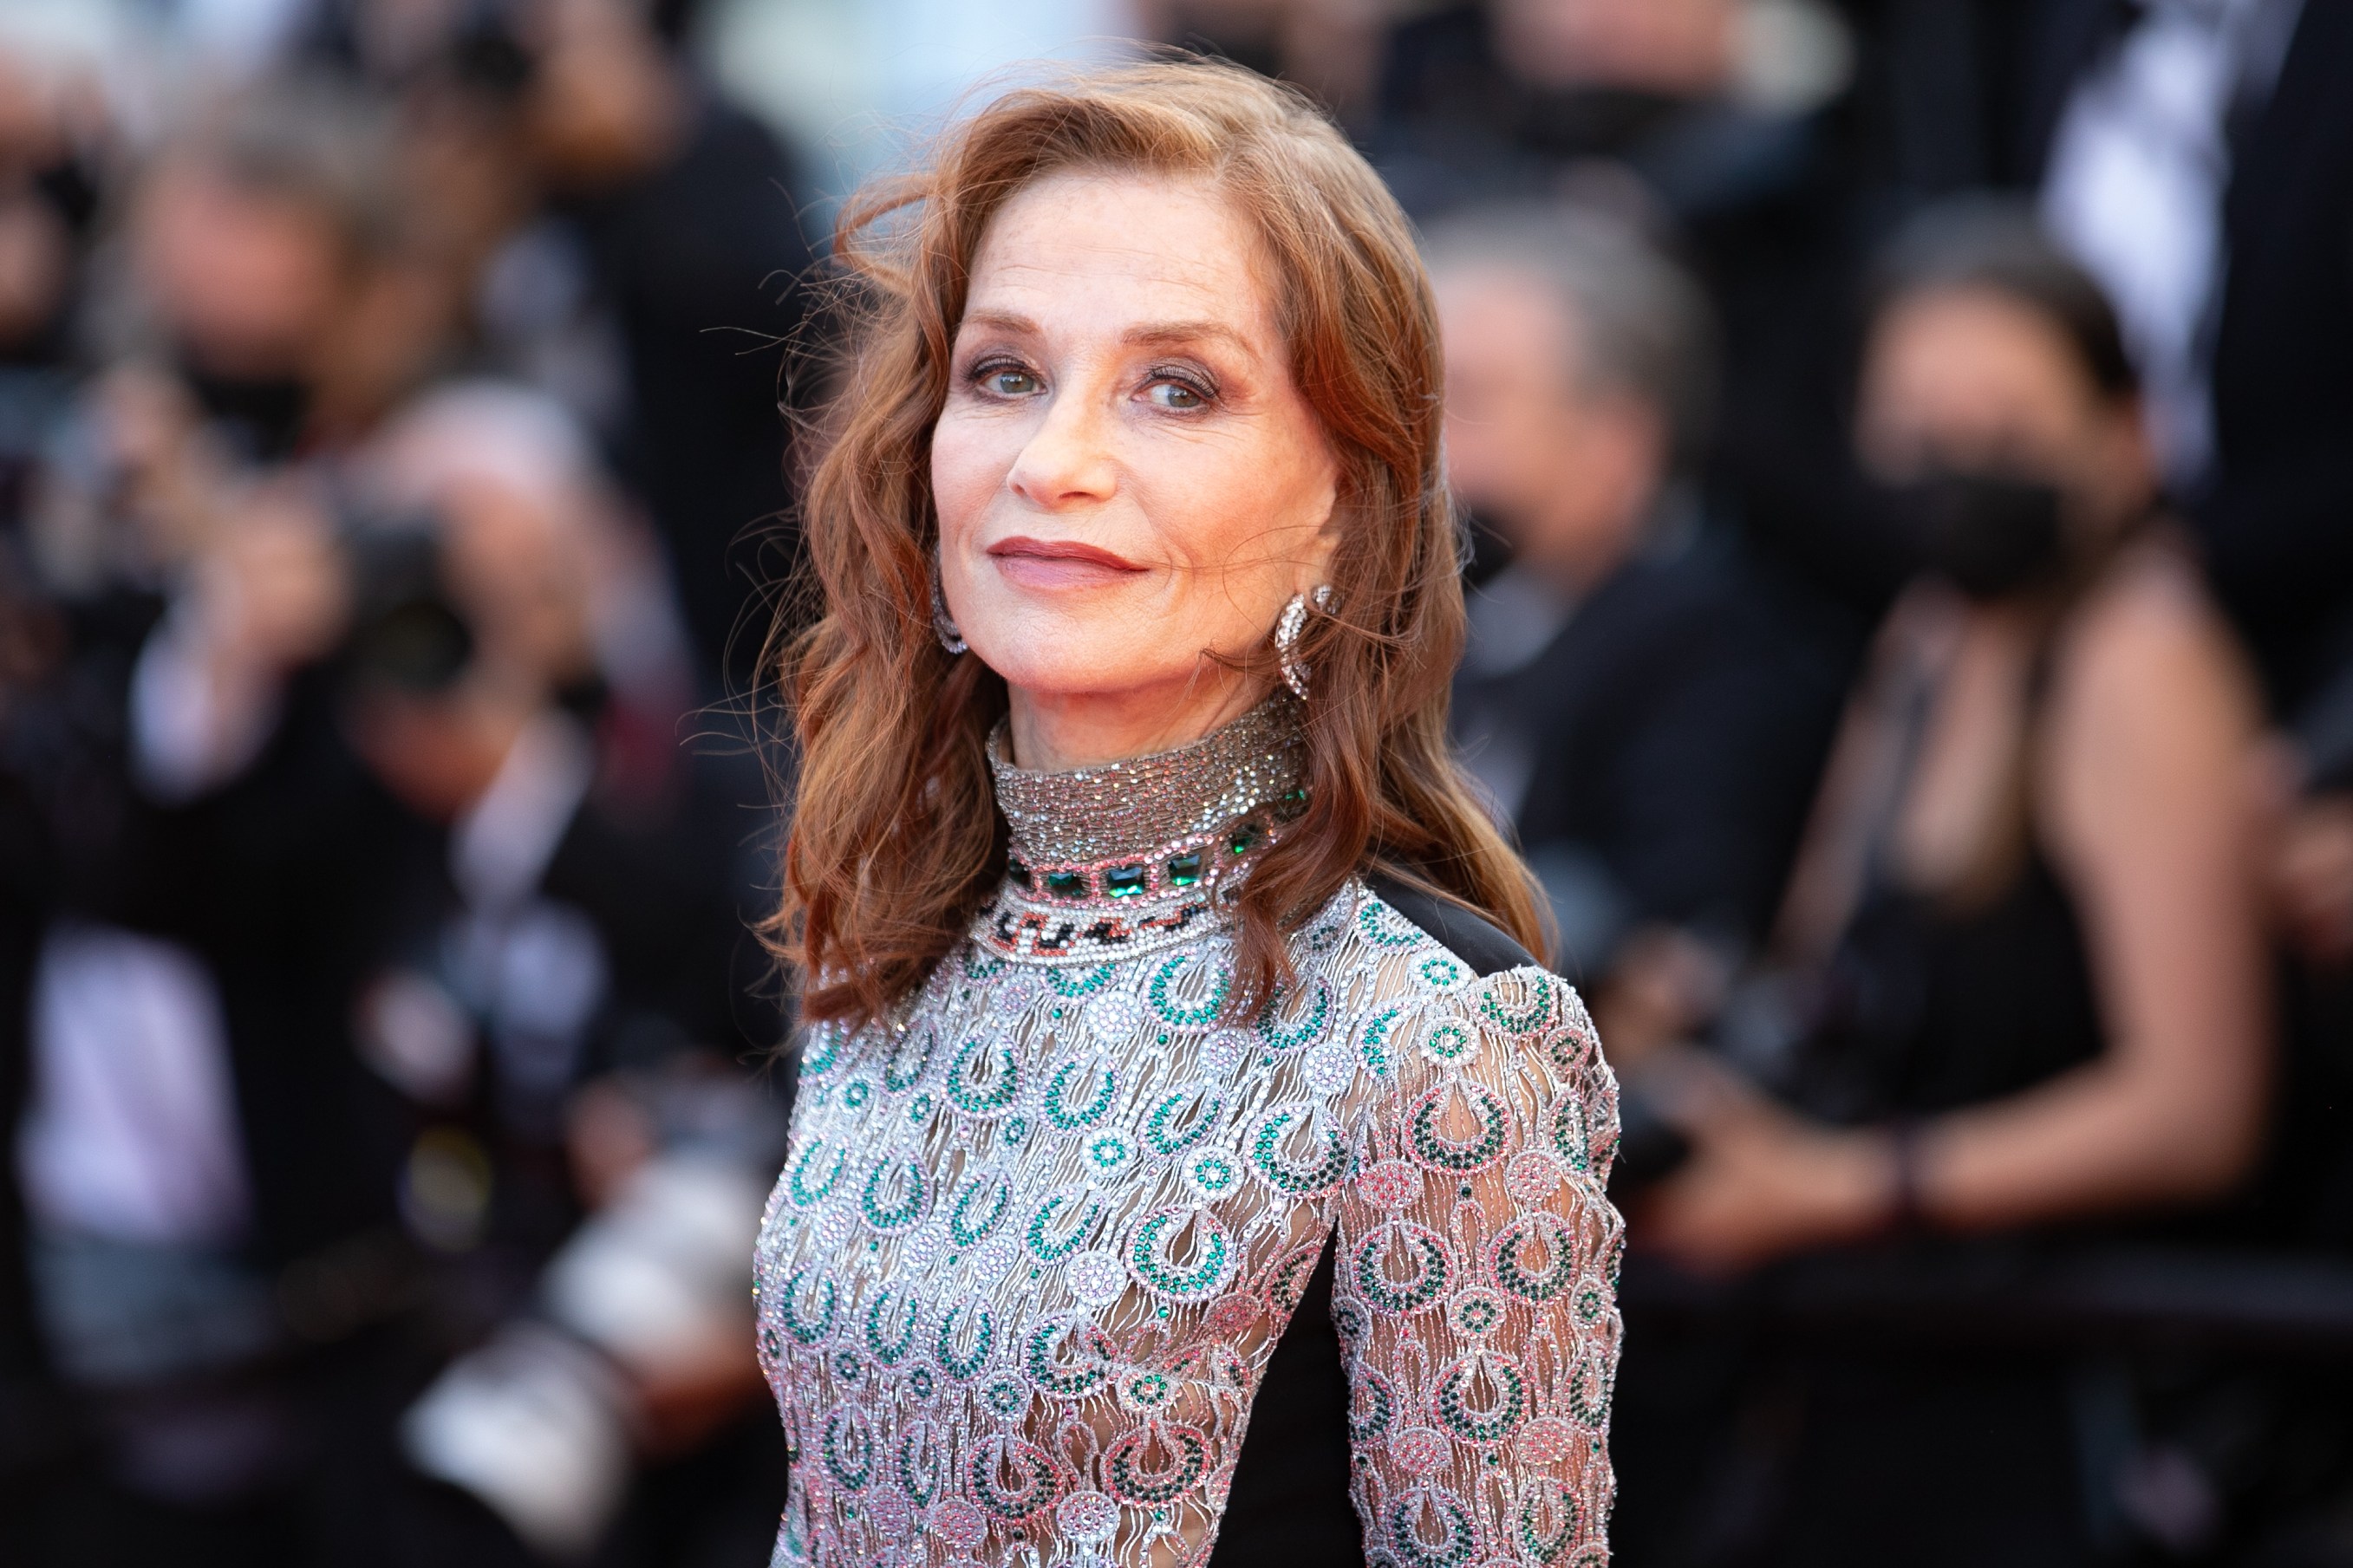 Isabelle Huppert: there are “so many fights to be won”, in all walks of life